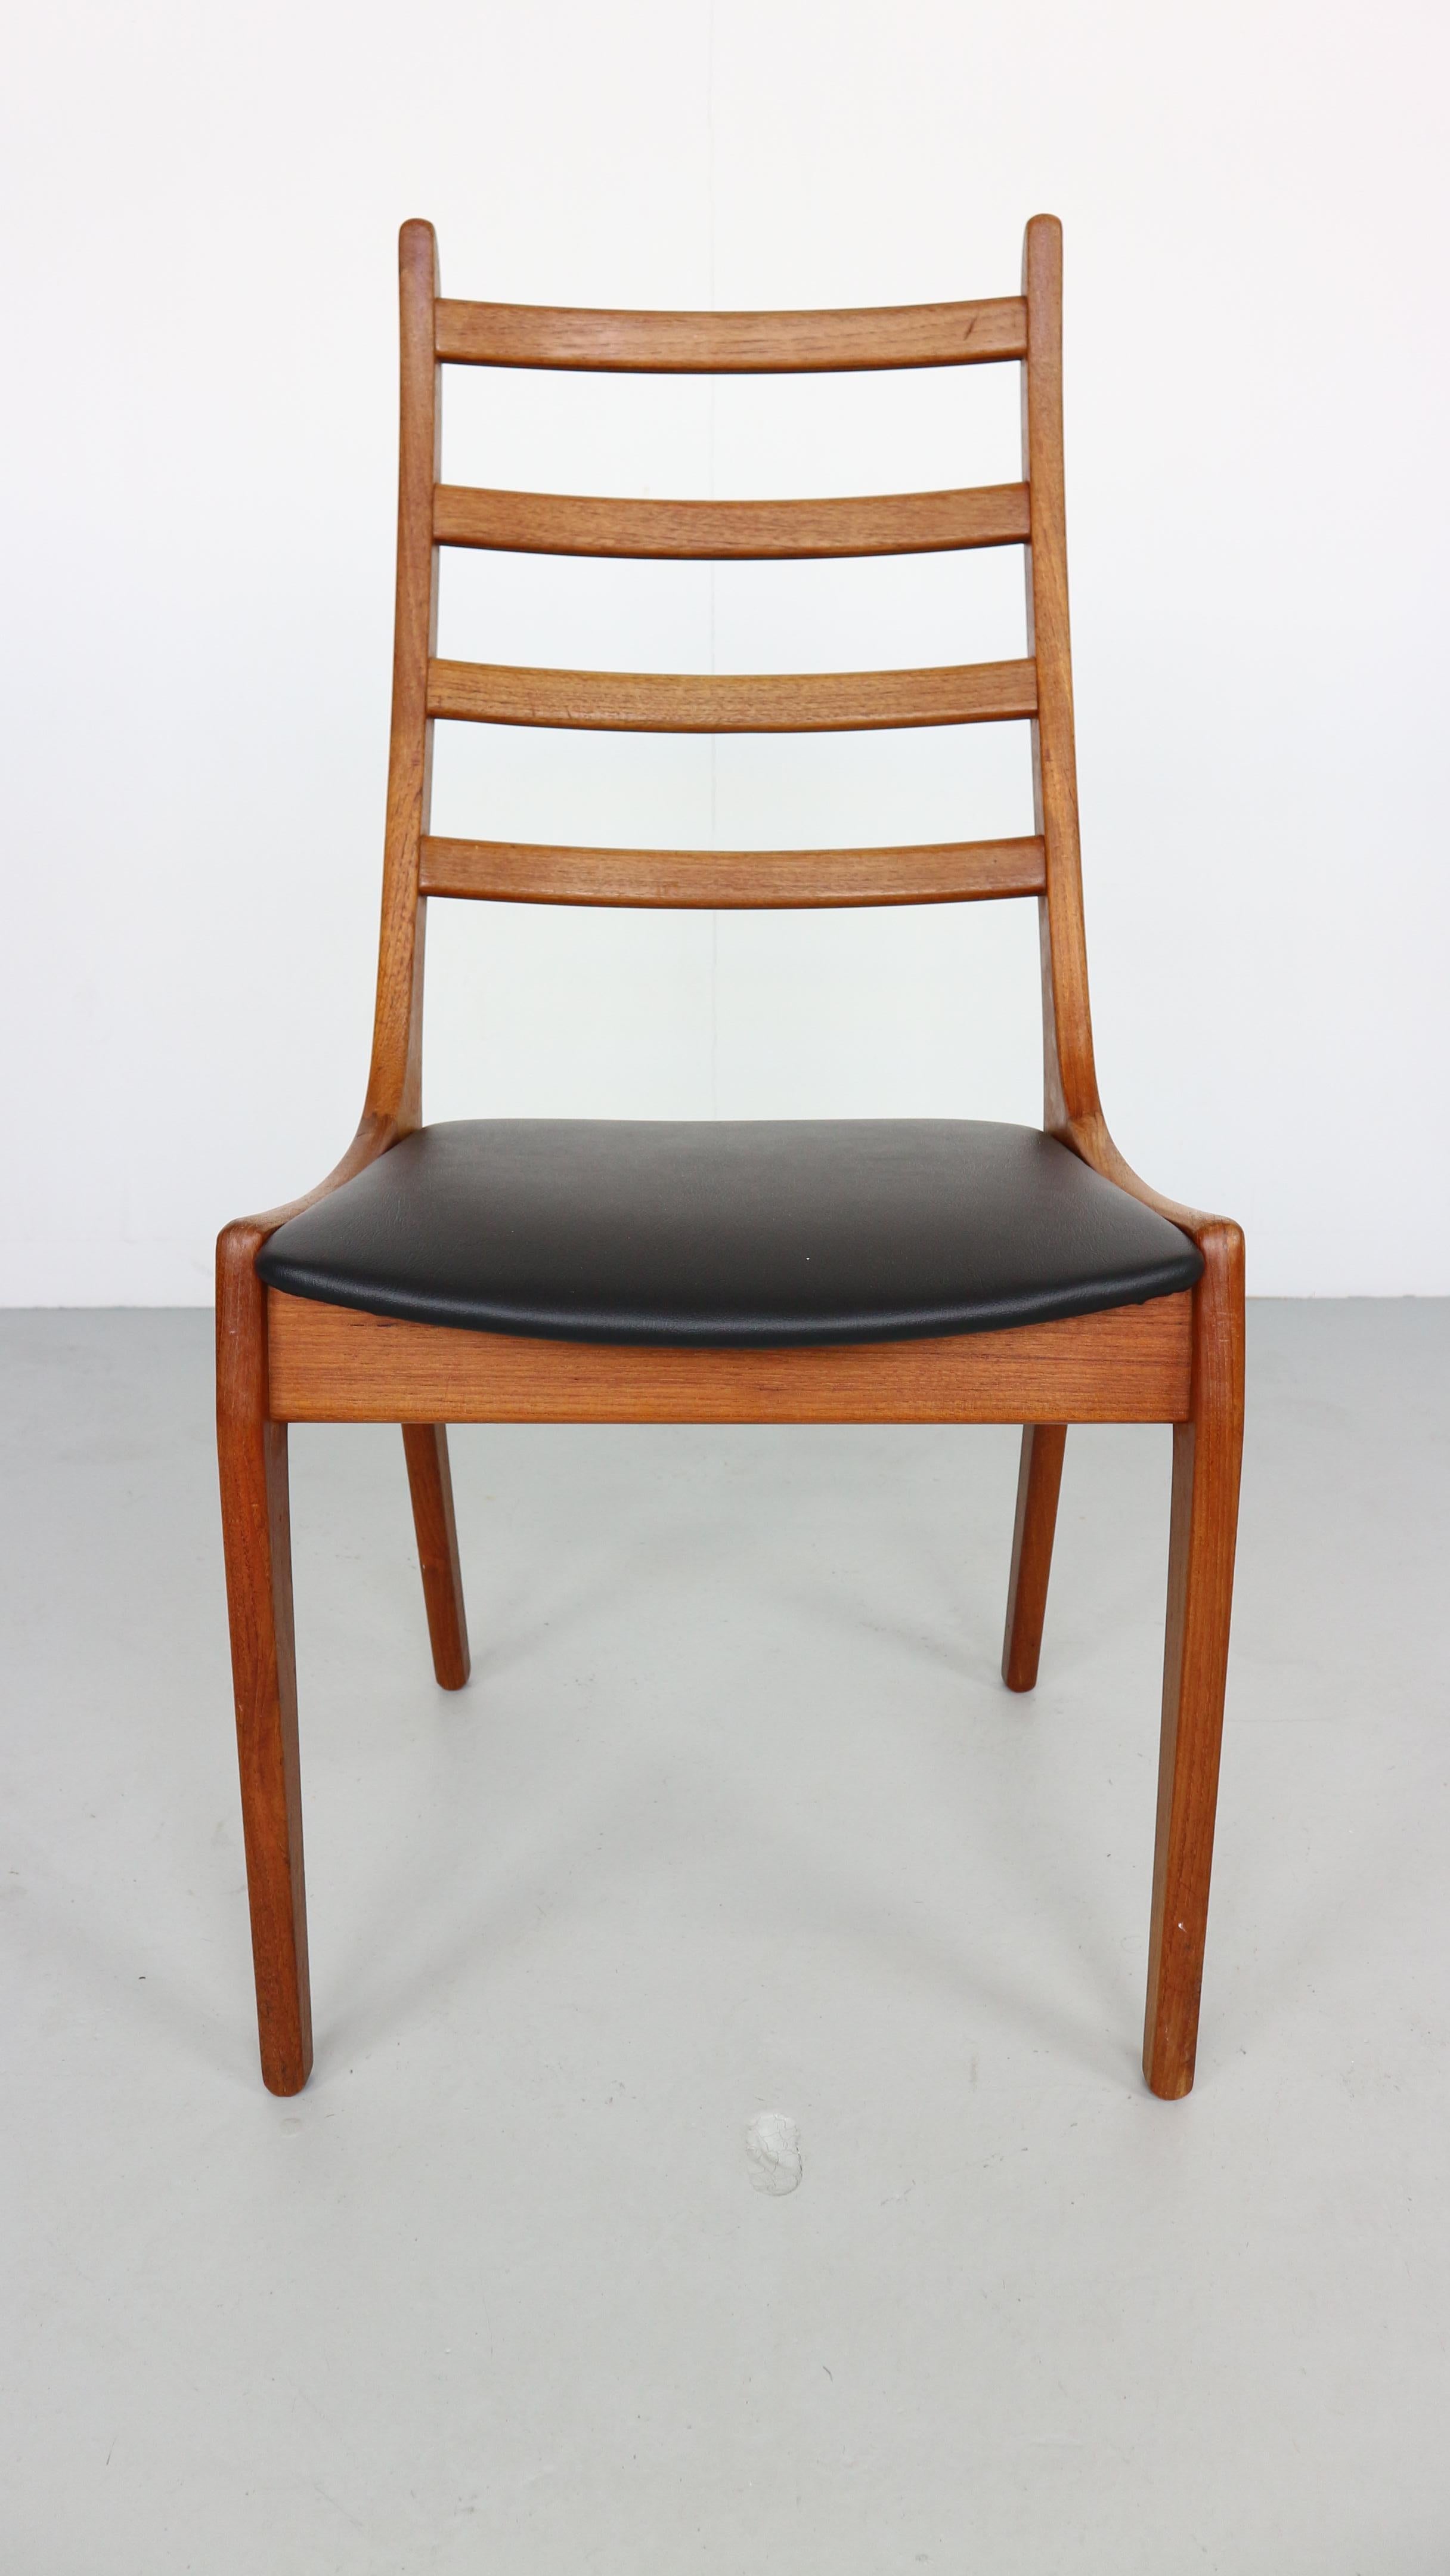 These stunning midcentury dining chairs were crafted by high end Danish maker Korup Stolefabrik. Subtle features such as the finger grip joints are a great design feature and a tribute to the quality of construction. Seats are newly upholstered in